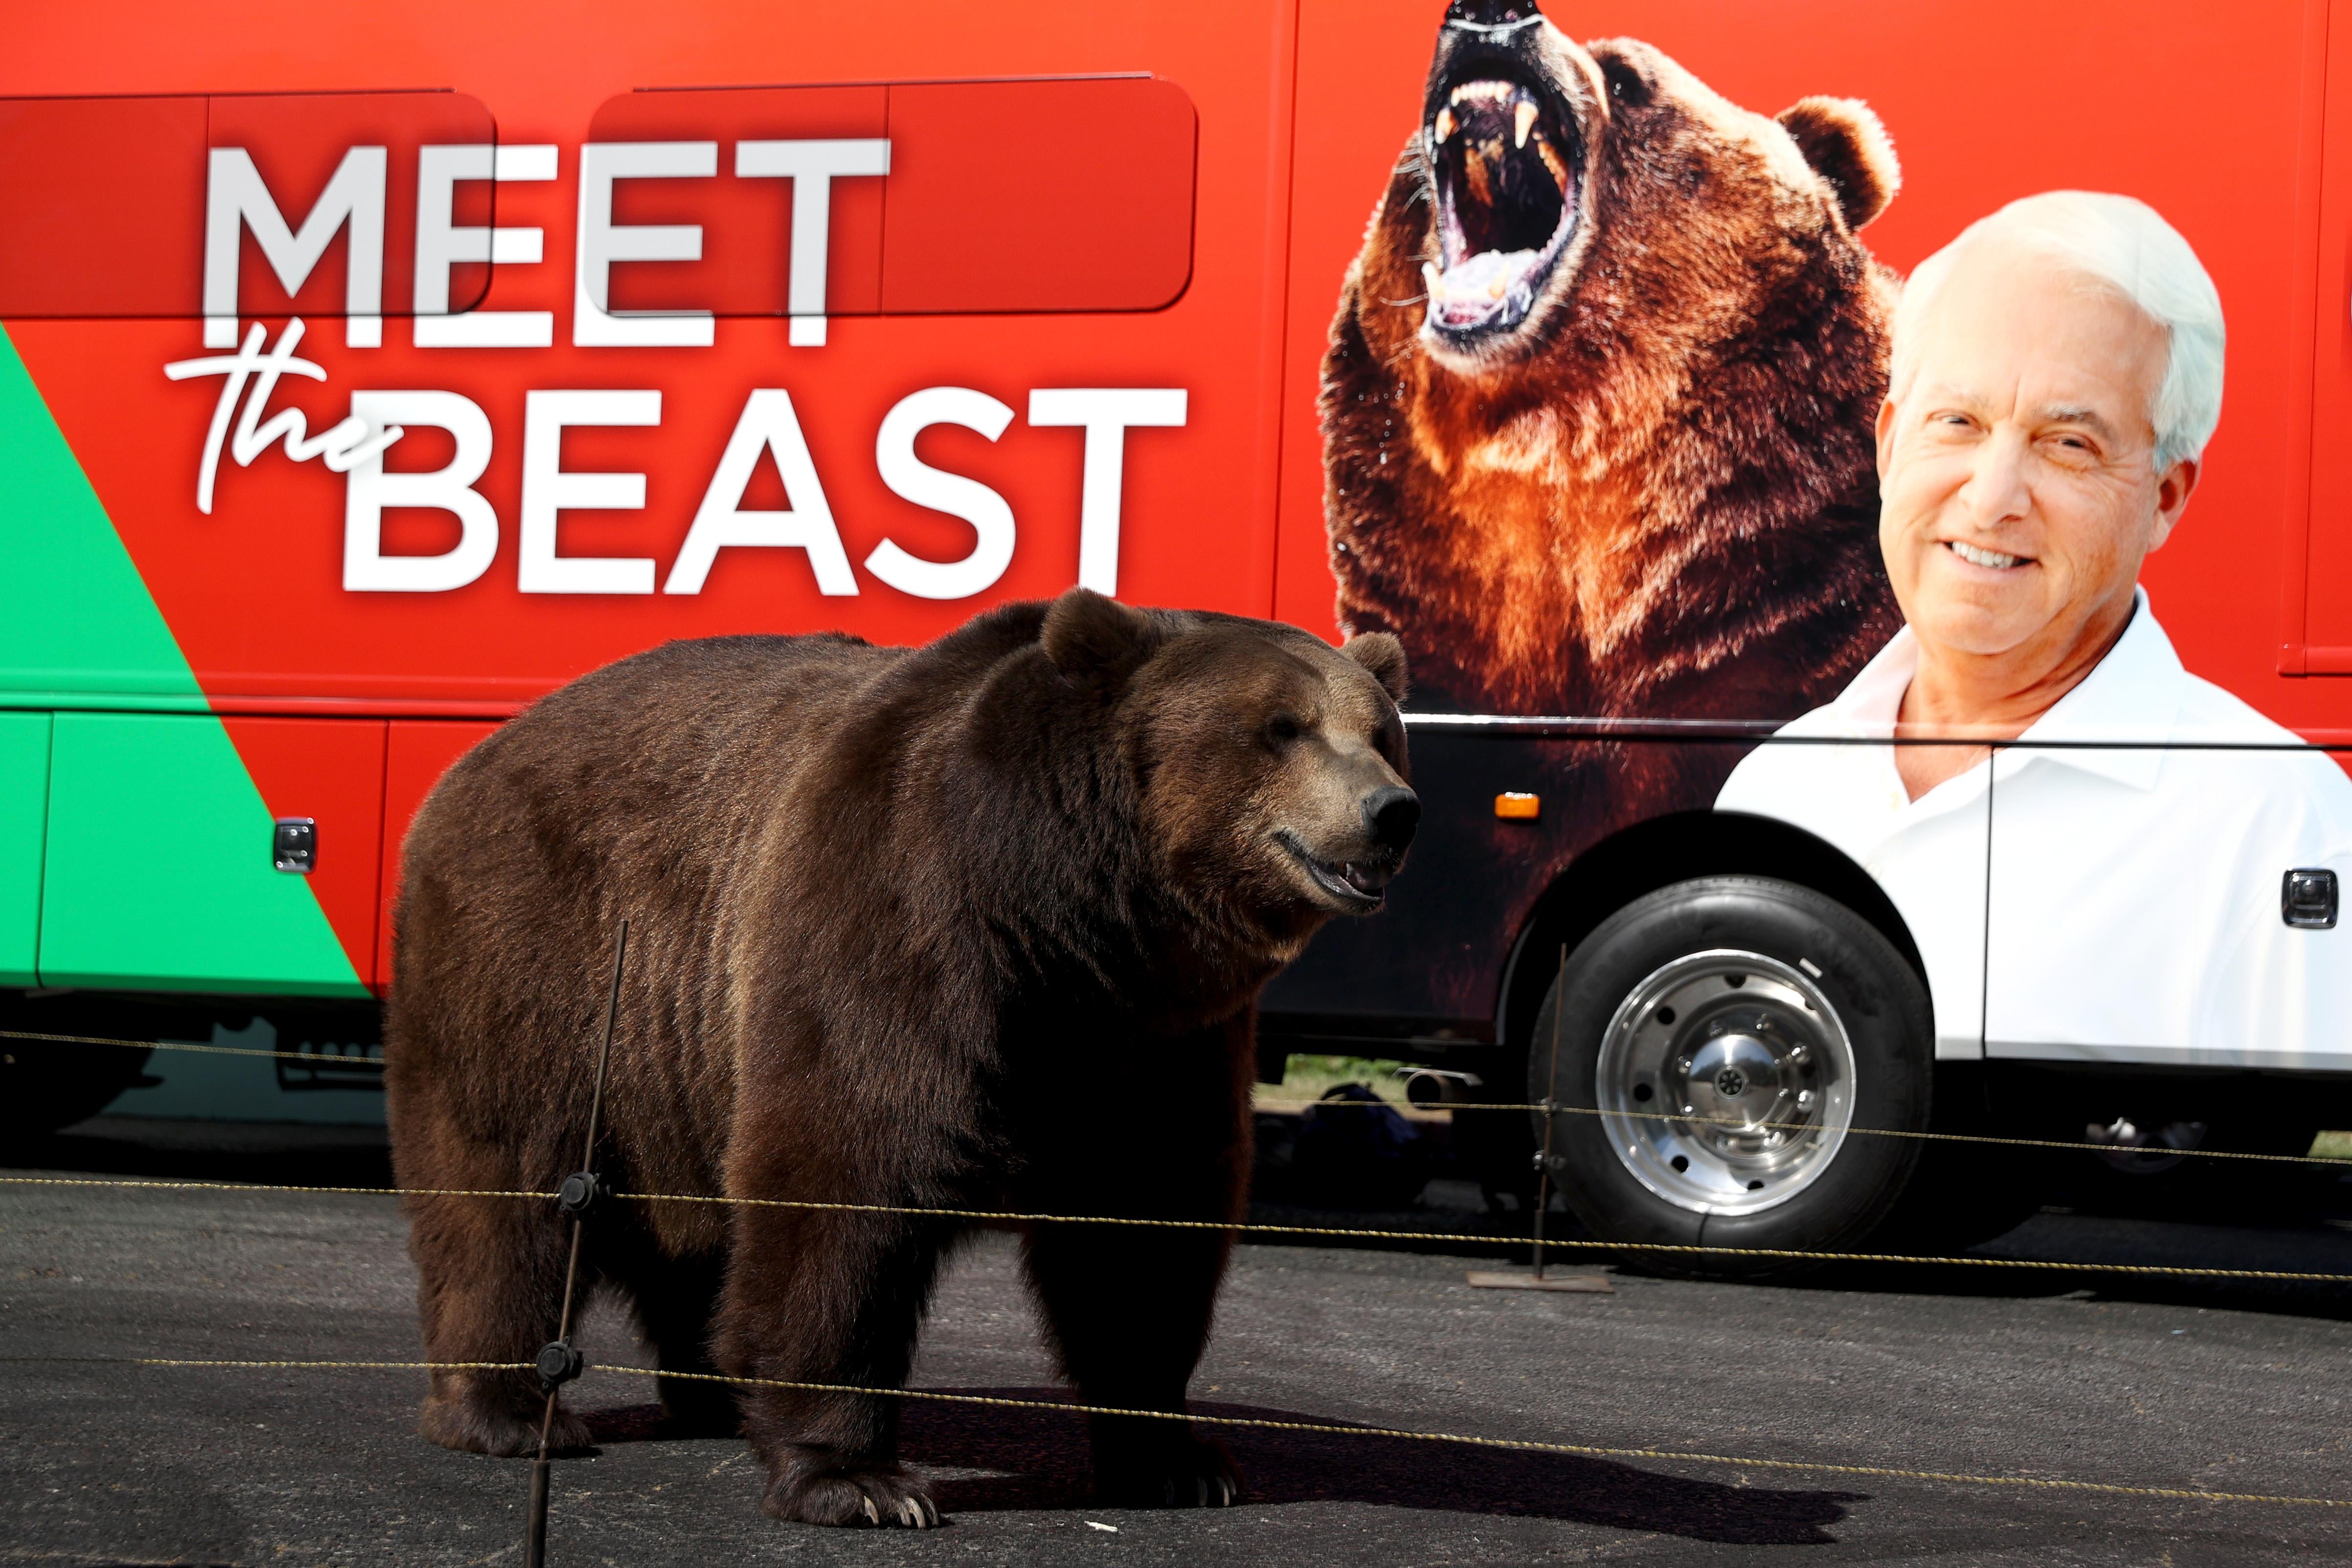 A 1,000 pound bear stands in front of the campaign bus for California republican gubernatorial candidate John Cox during a campaign rally at Miller Regional Park on May 04, 2021 in Sacramento, California. Republican candidate for California governor John Cox kicked off his campaign with a press event that featured a live 1,000 pound bear. 